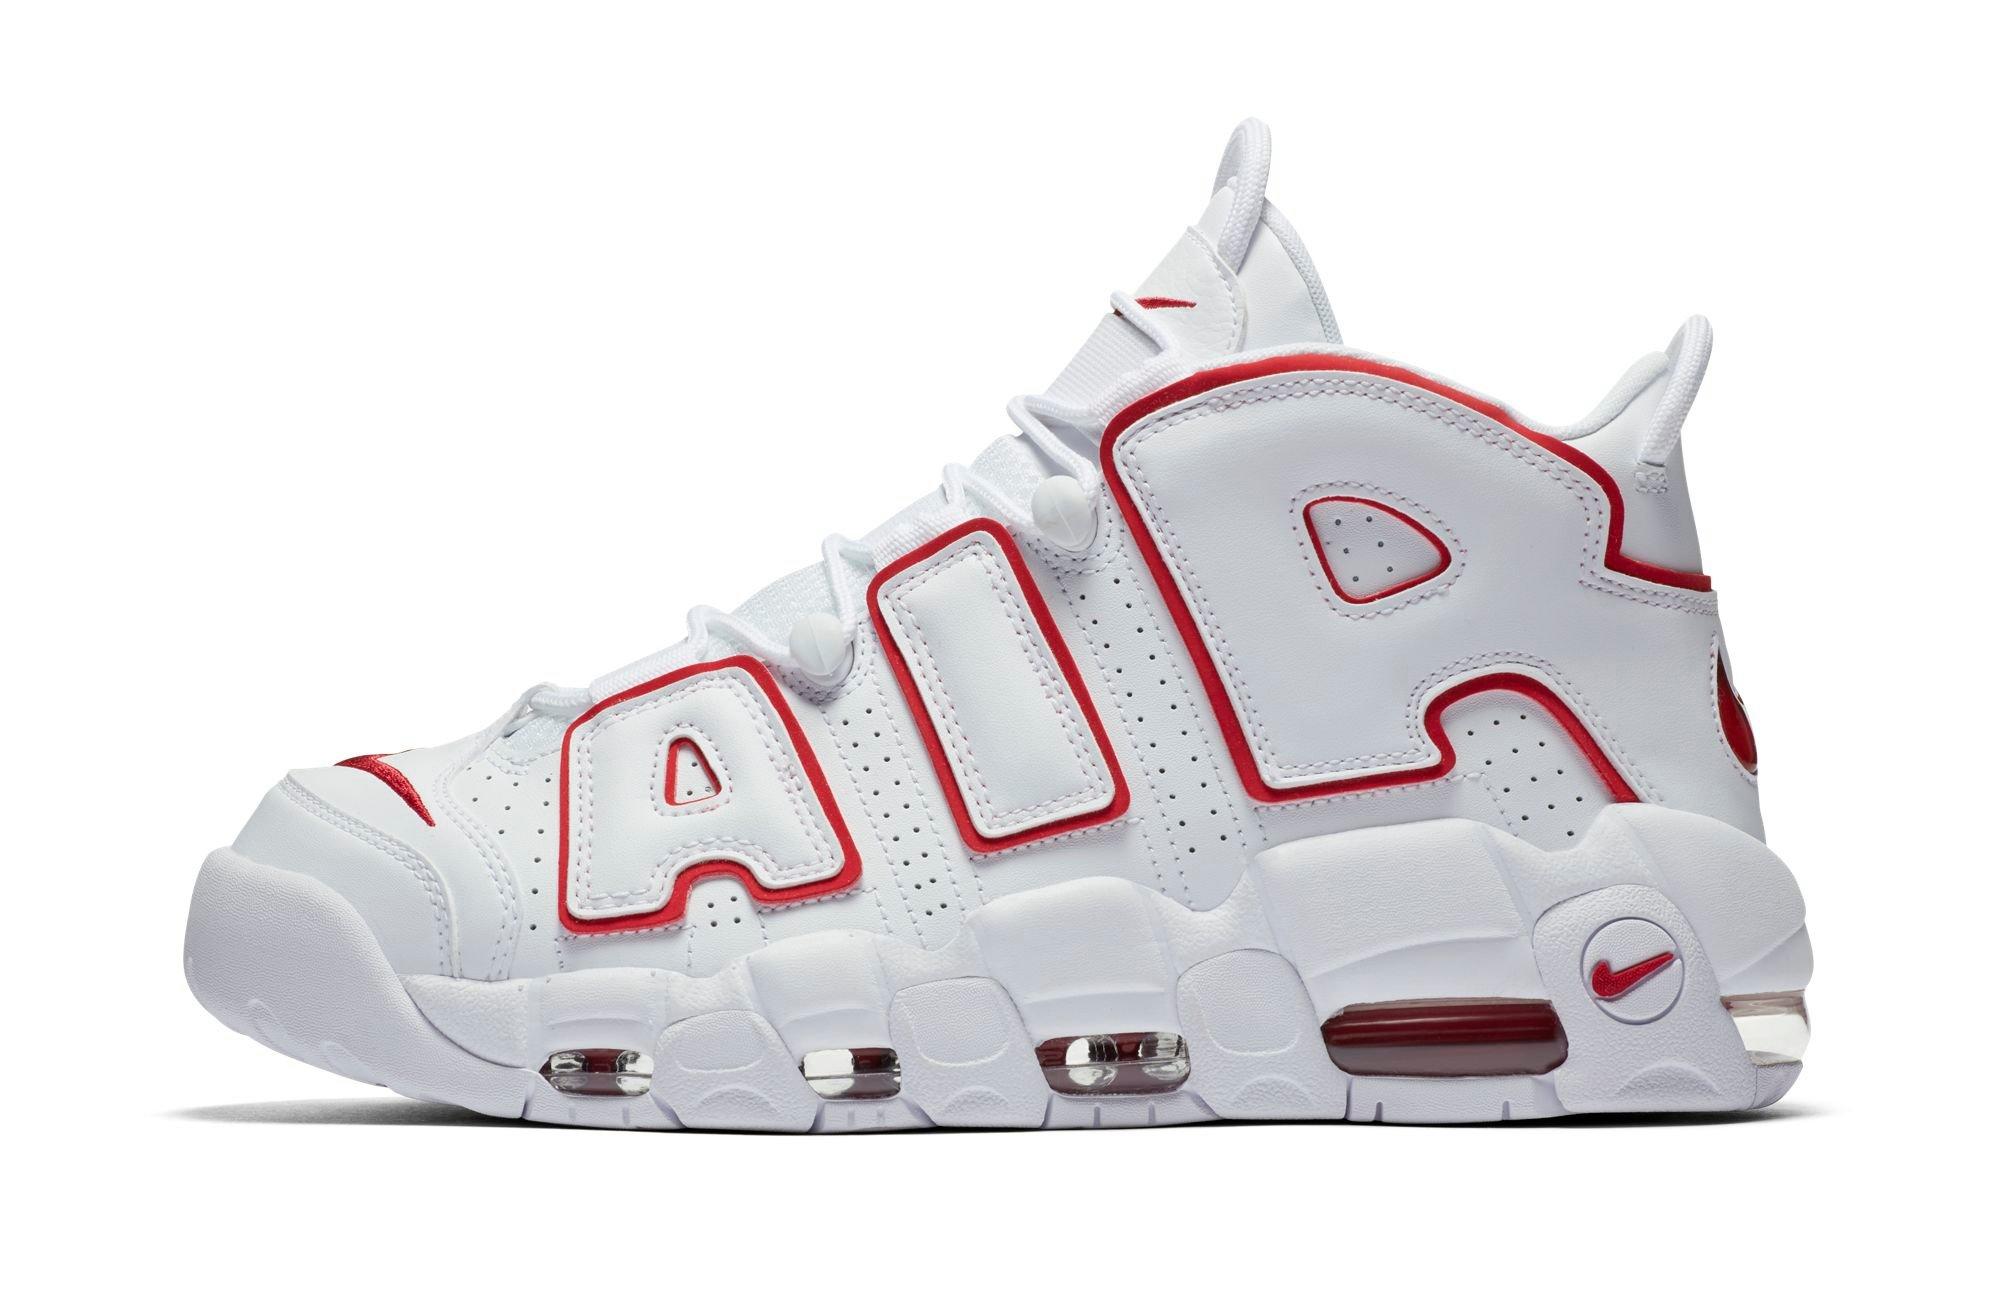 Release- Nike Air More Uptempo “Renowned Rhythm” Kids' Shoe Out 4/15